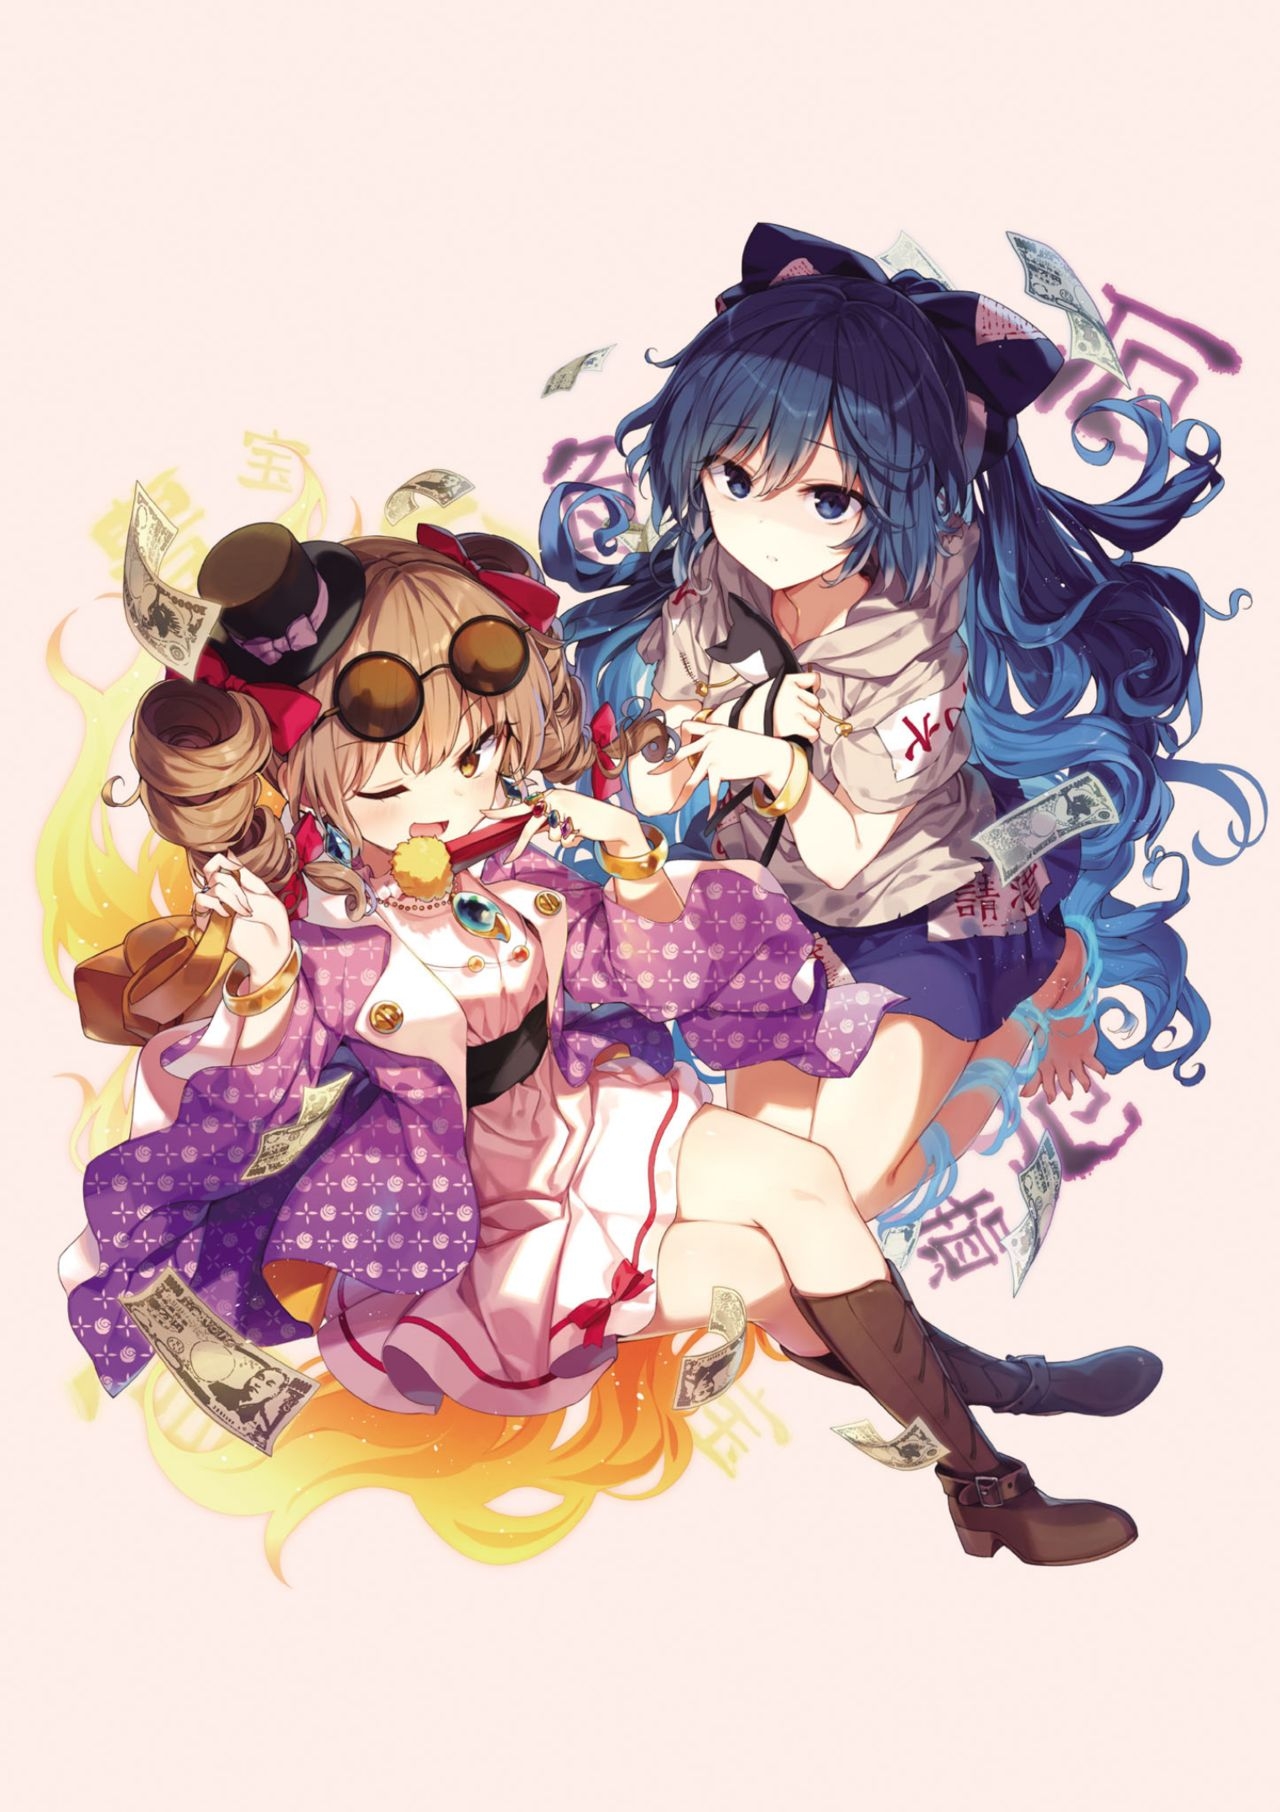 [Zun]Touhou Project Who's Who of Humans & Youkai - Dusk Edition illustrations 46